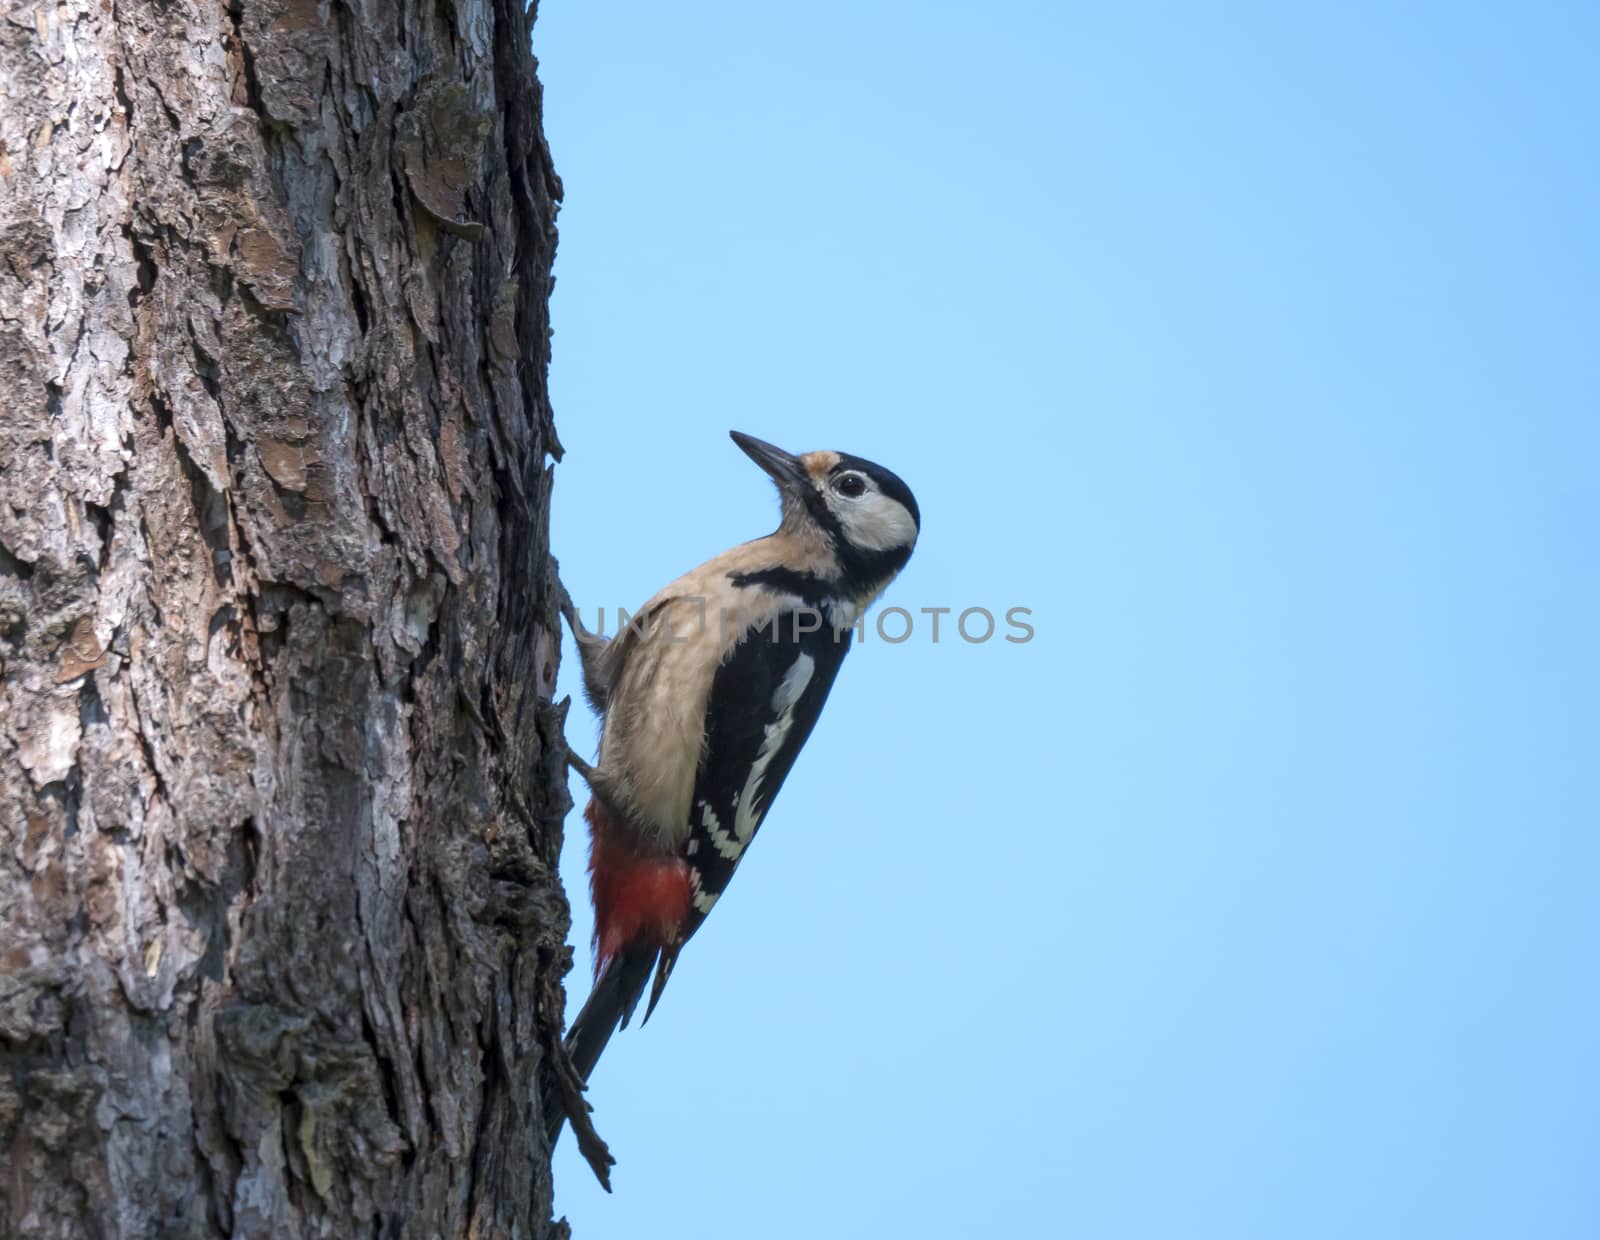 Close up male bird The great spotted woodpecker, Dendrocopos major perched on the larch tree trunk. Blue sky background. Selective focus